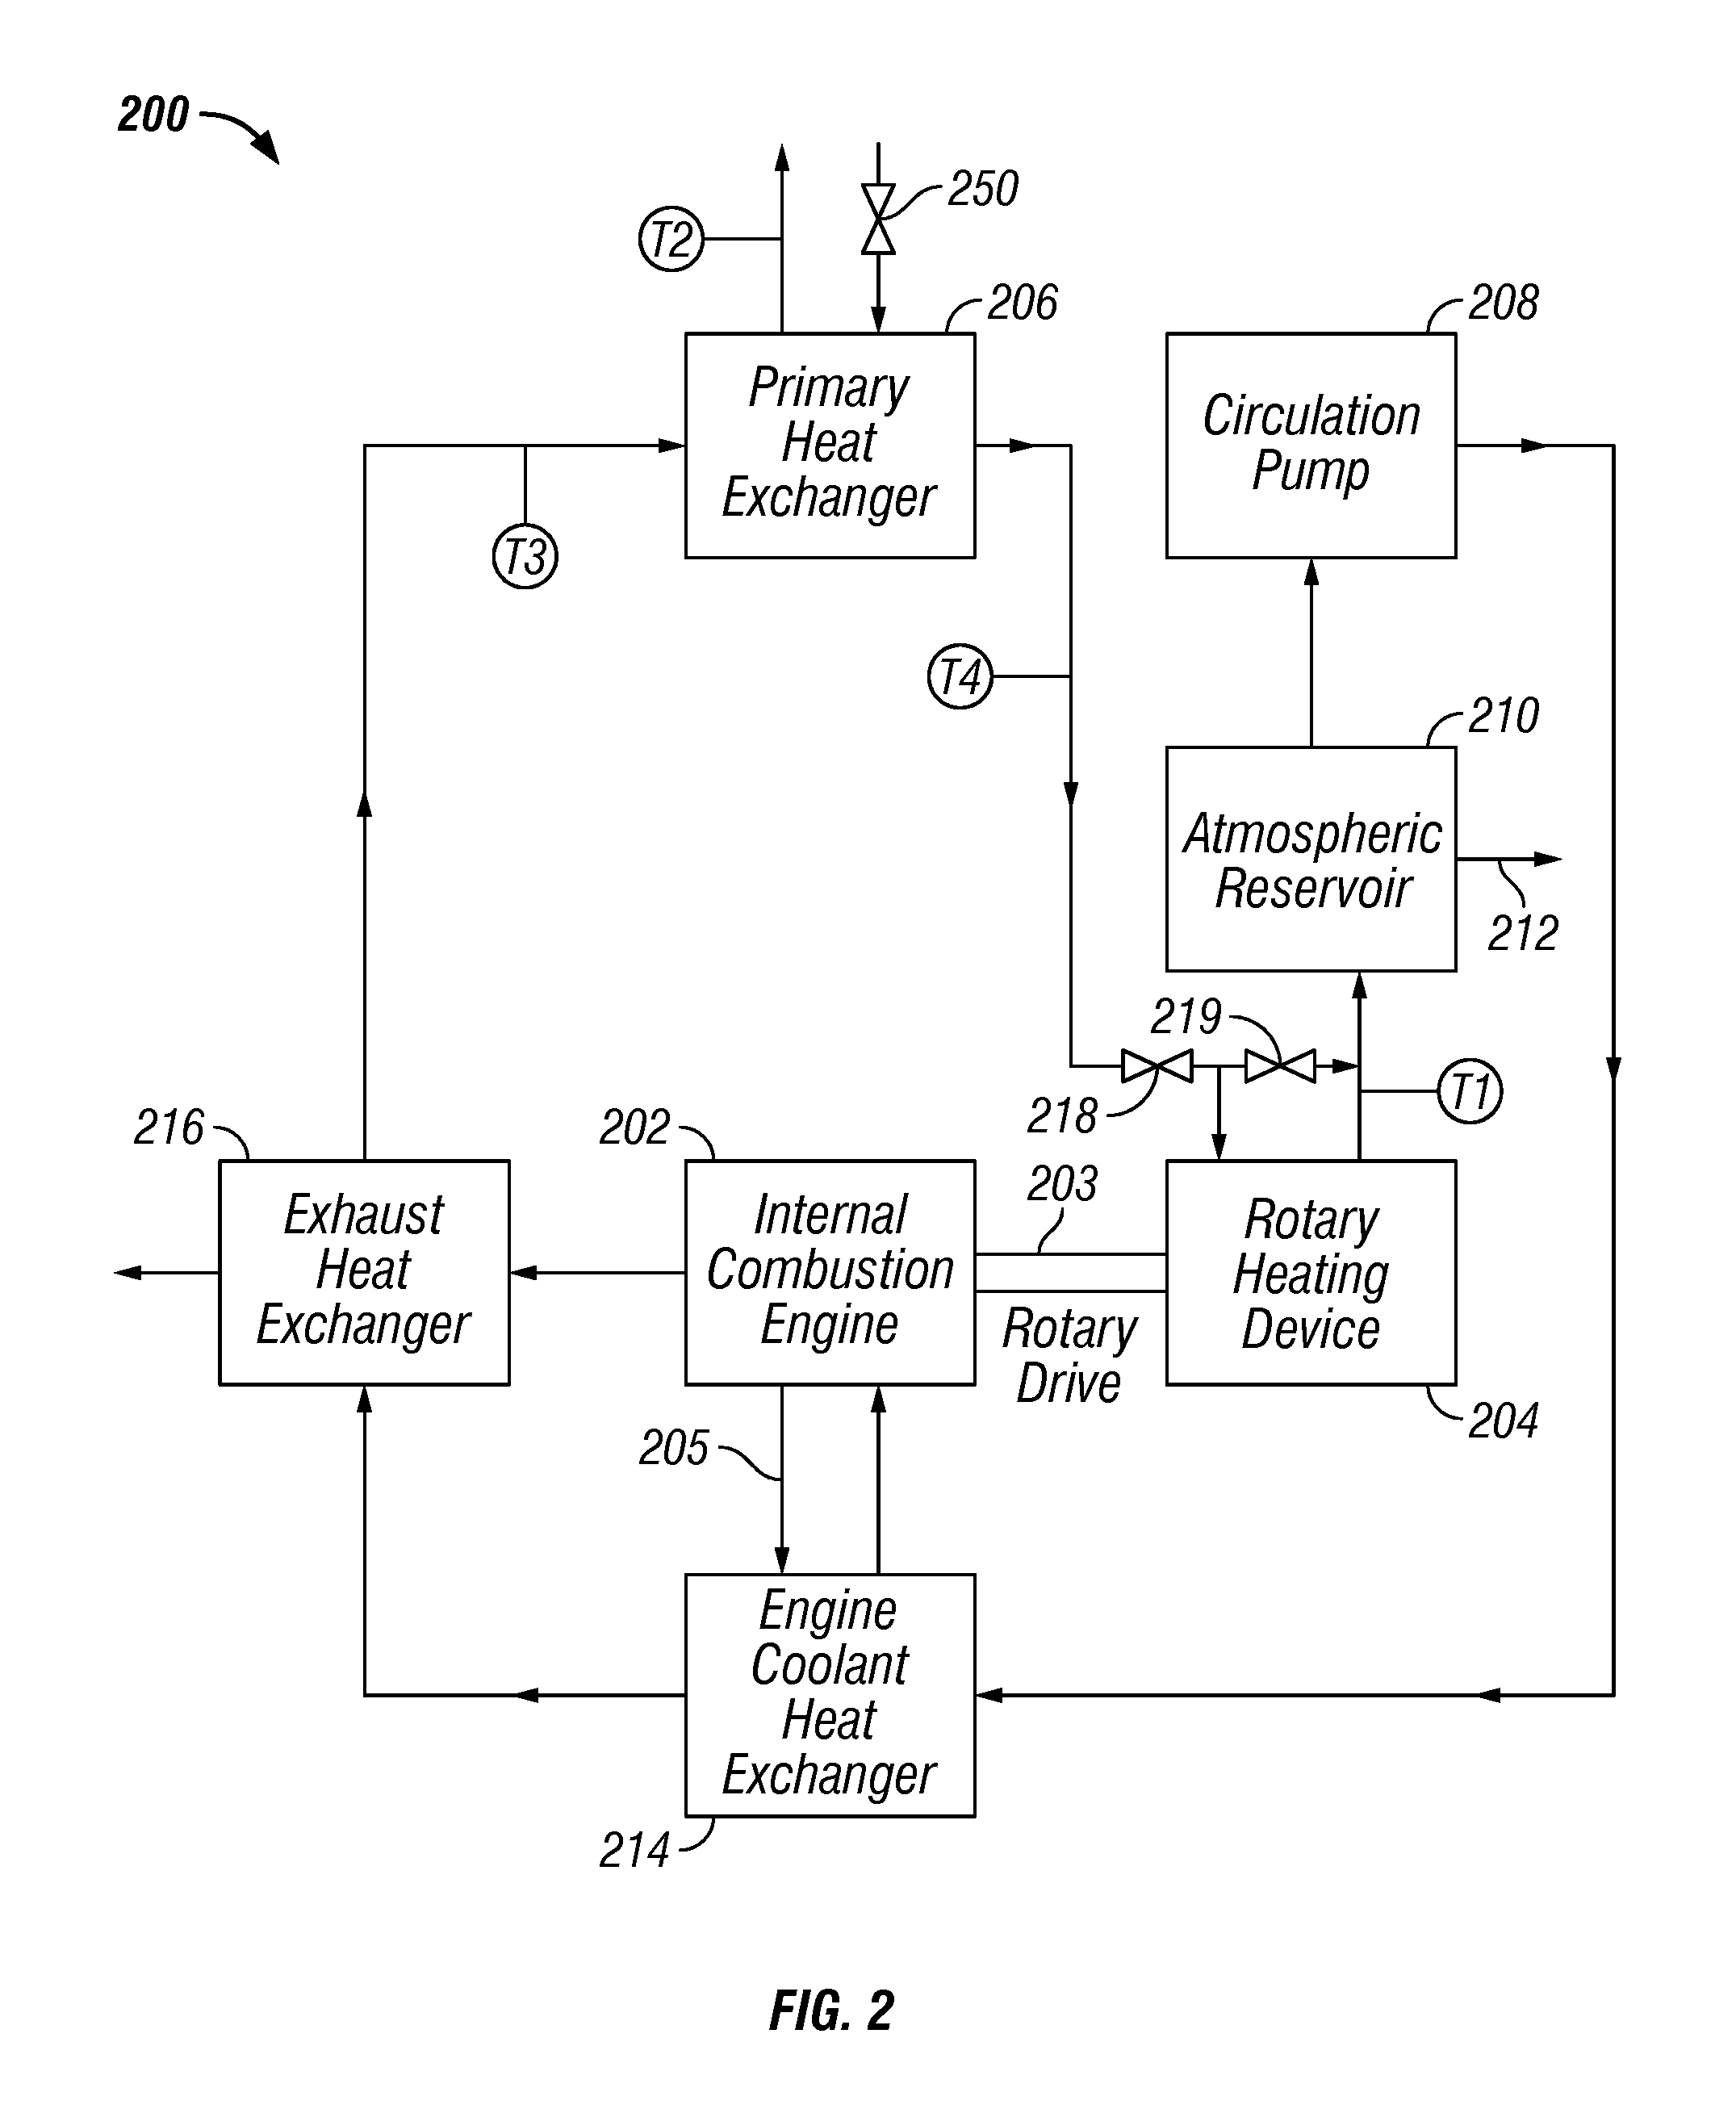 Methods and apparatuses for heating, concentrating and evaporating fluid